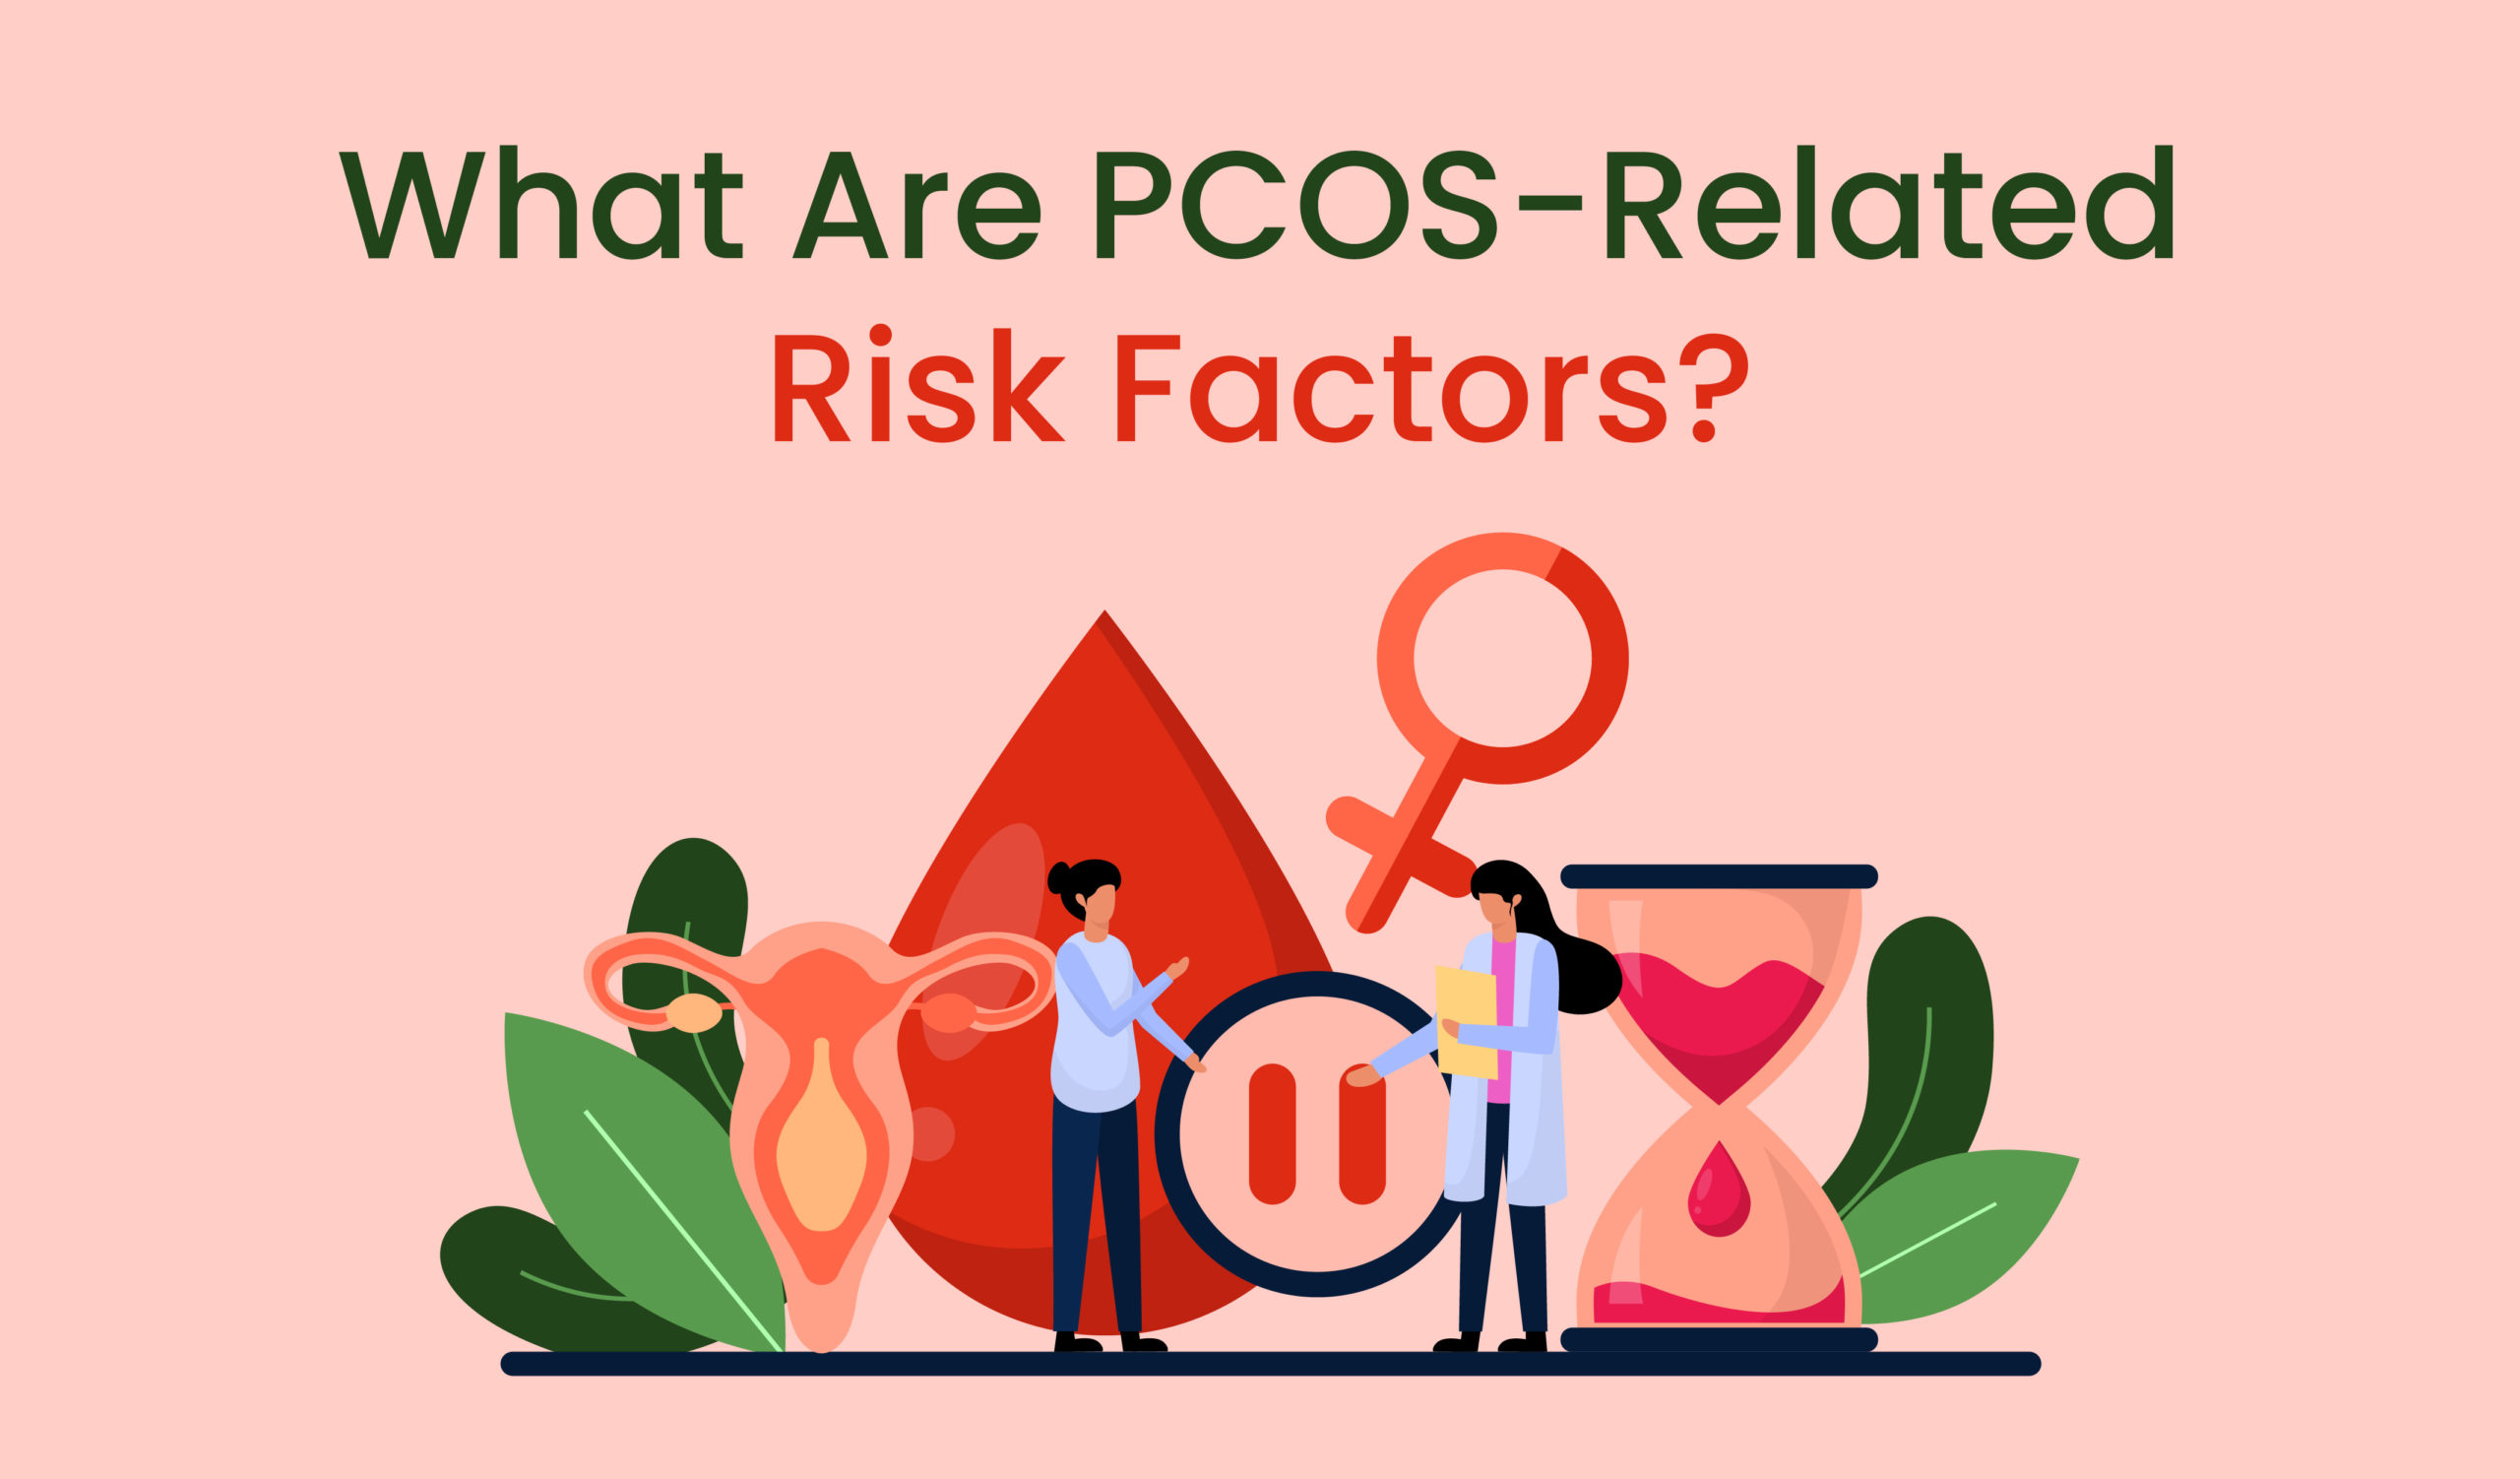 What are the PCOS-related risk factors